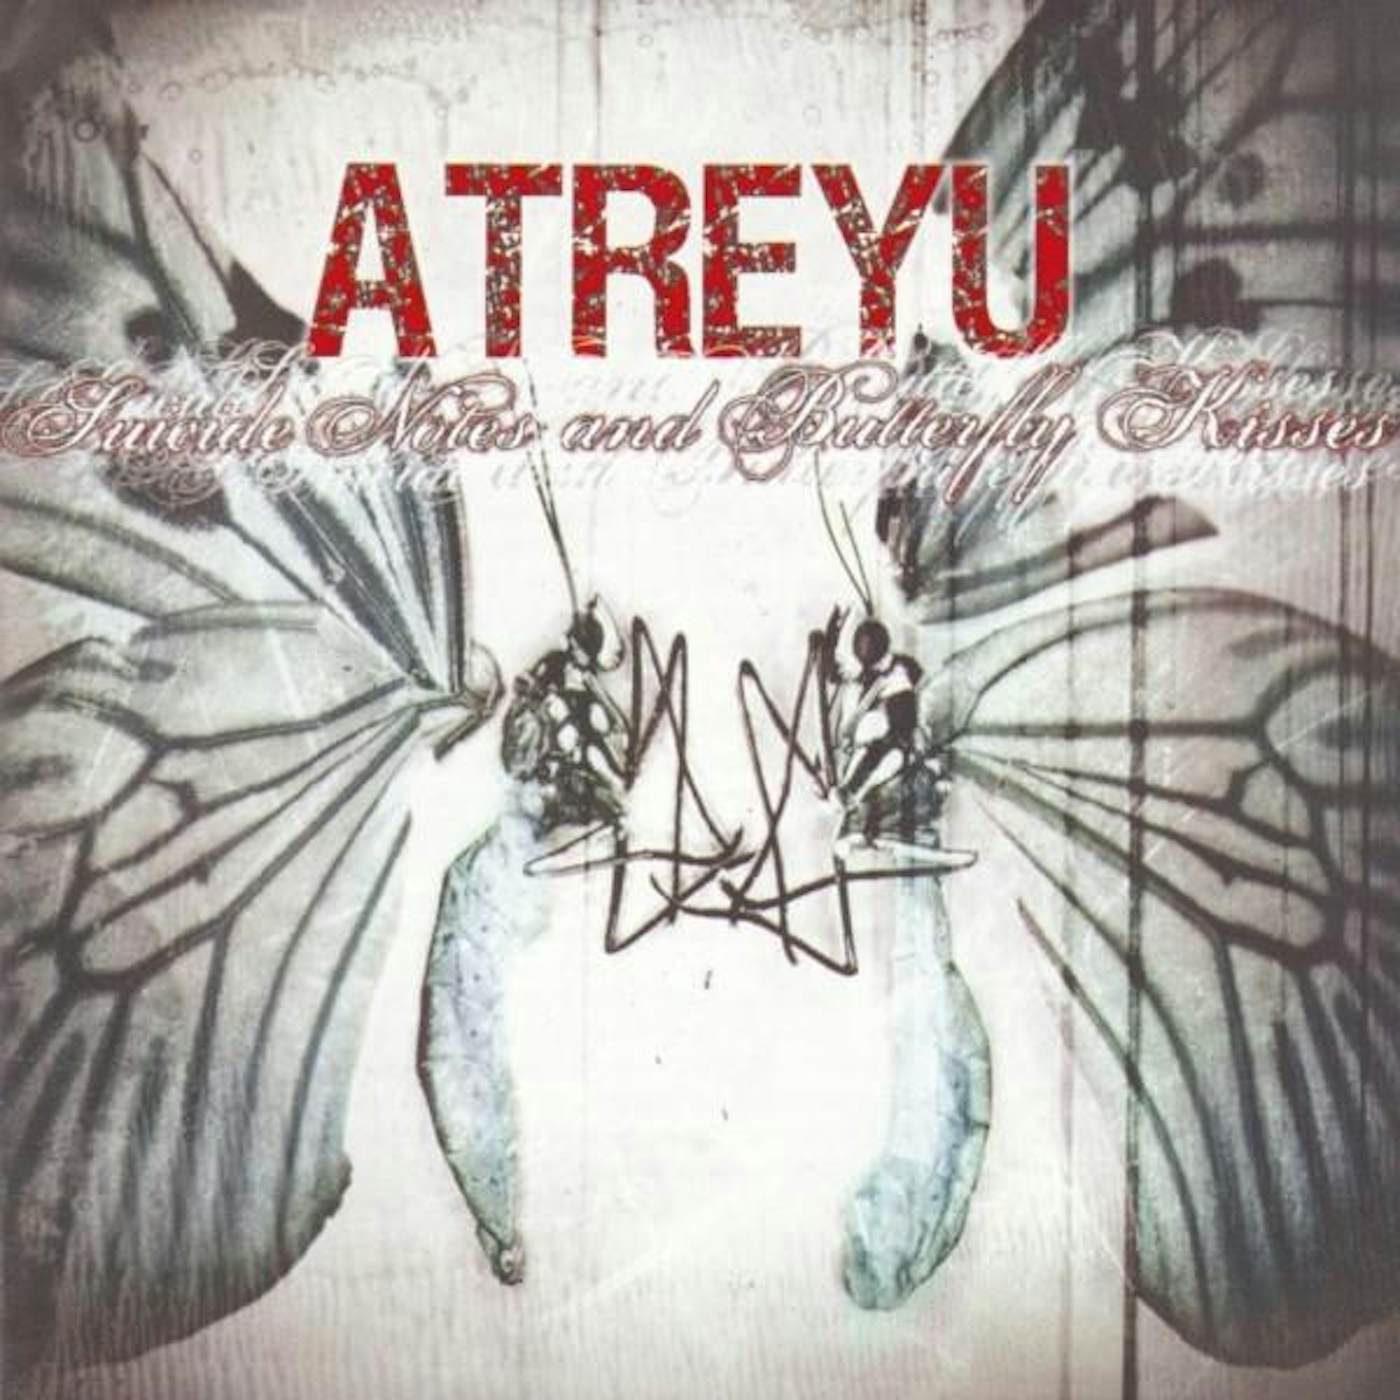 Atreyu Suicide Notes And Butterfly Kisses Vinyl Record